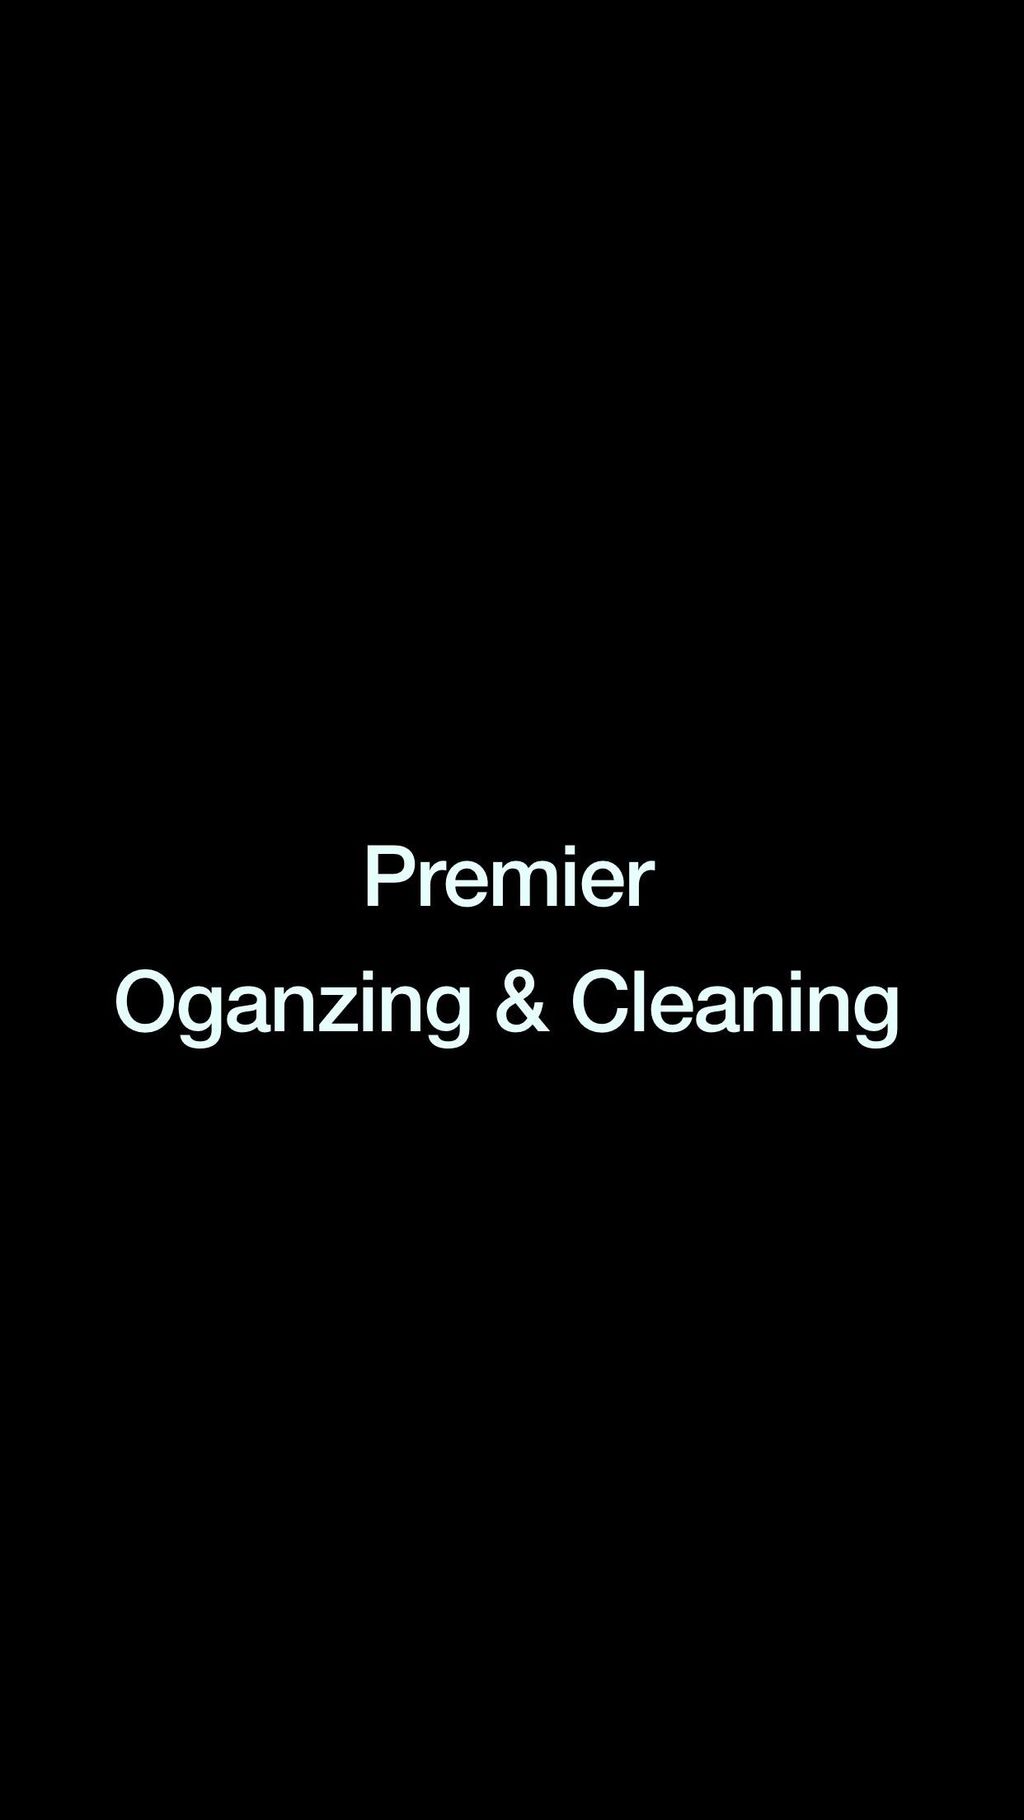 Premier Organizing And Cleaning